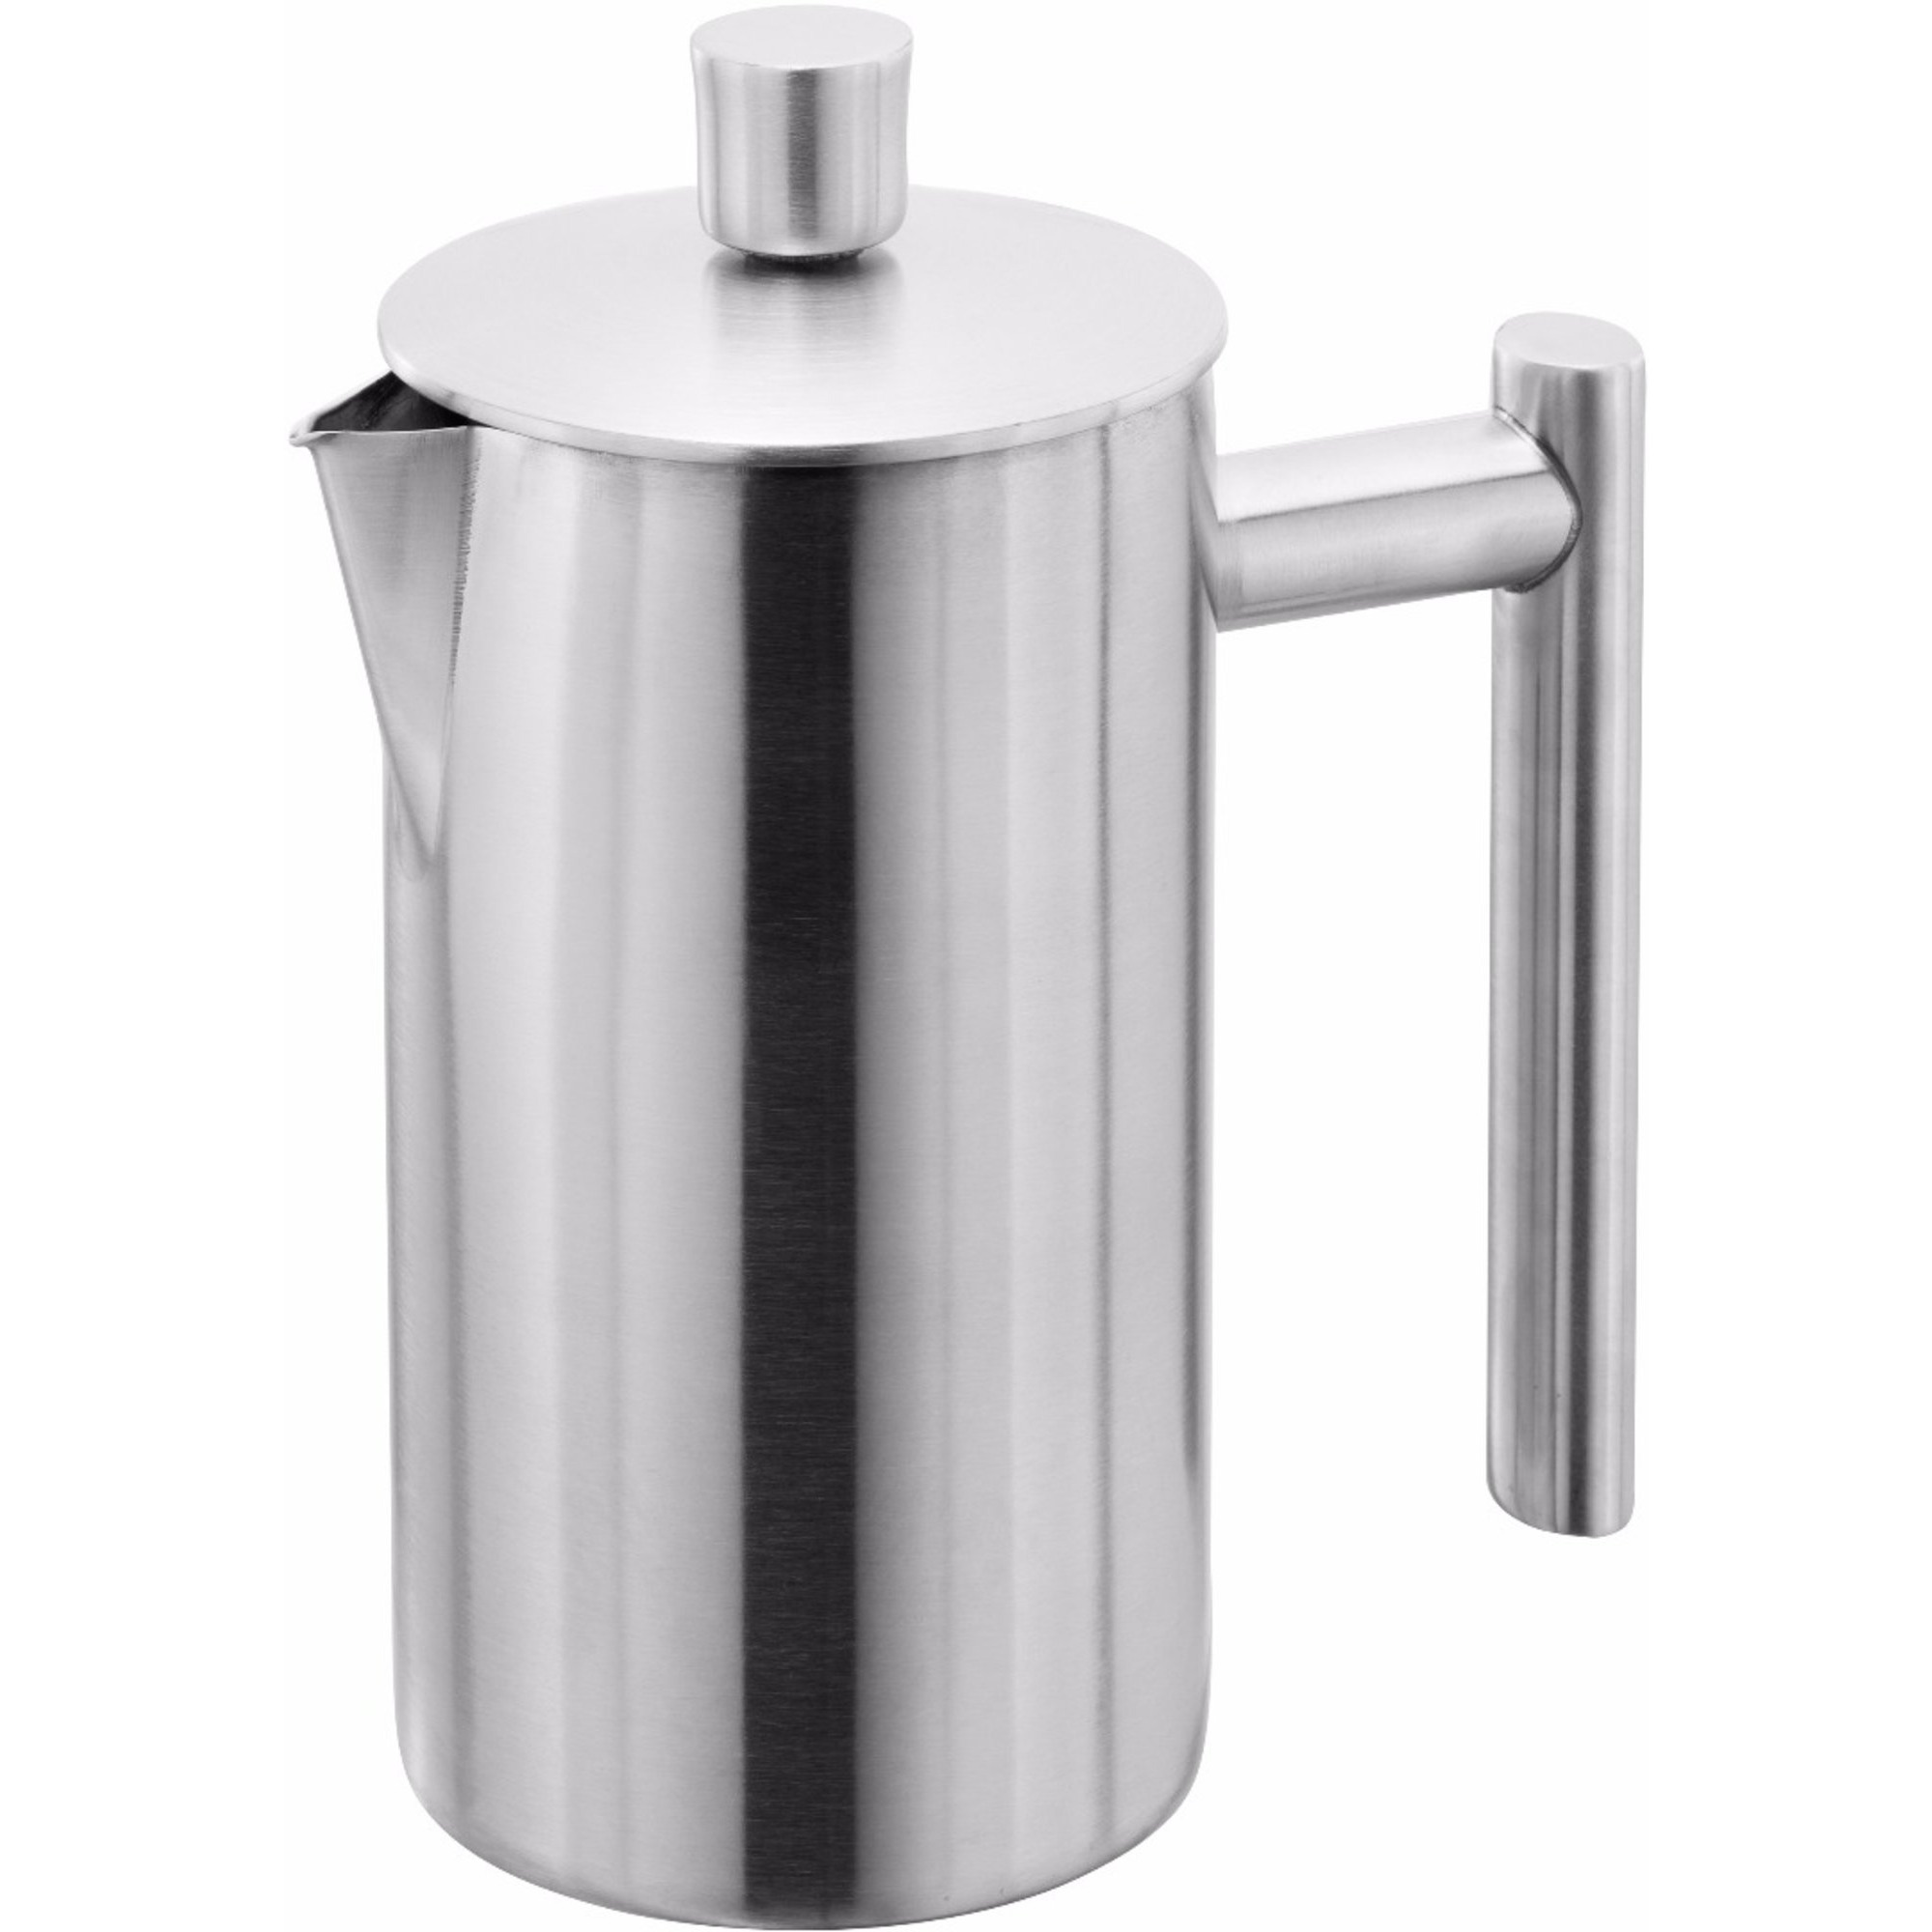 Horwood Cafetiere Doublewall 325ml 3 cup